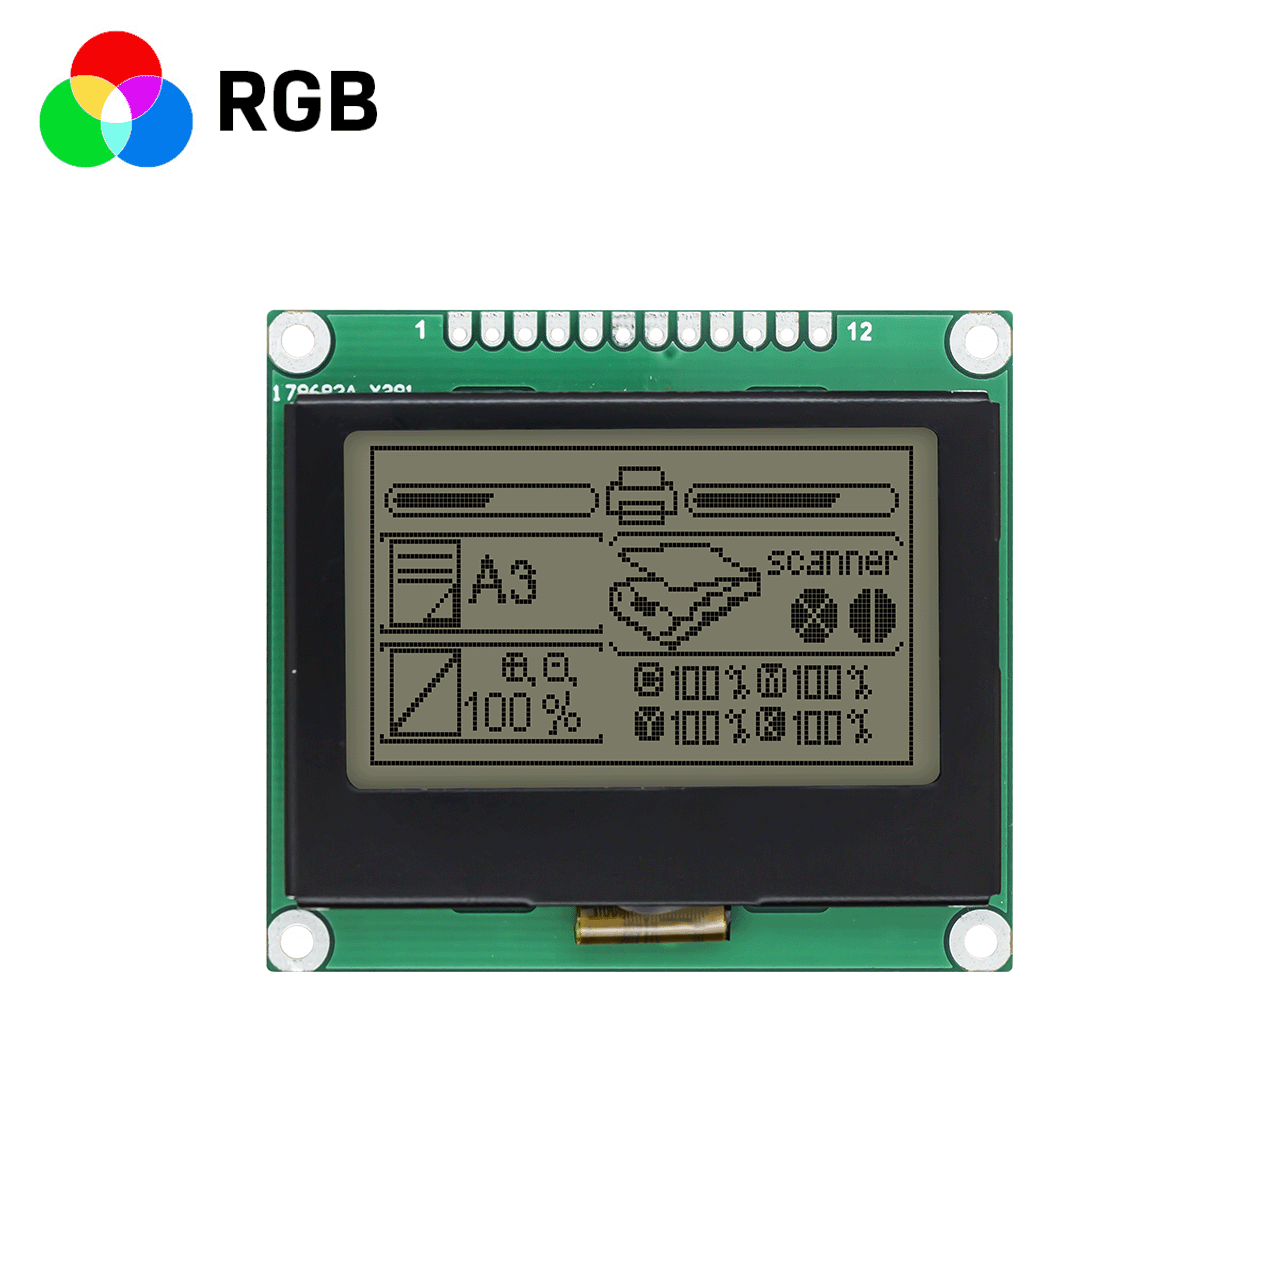 2.0 inch 128x64 3.3v LCD Graphic LCD Module | 128 X 64 Graphic Dot Matrix Module | FSTN Positive Display | SPI Interface |Transmissive Polarizer | RGB Red, Green and Blue Backlight